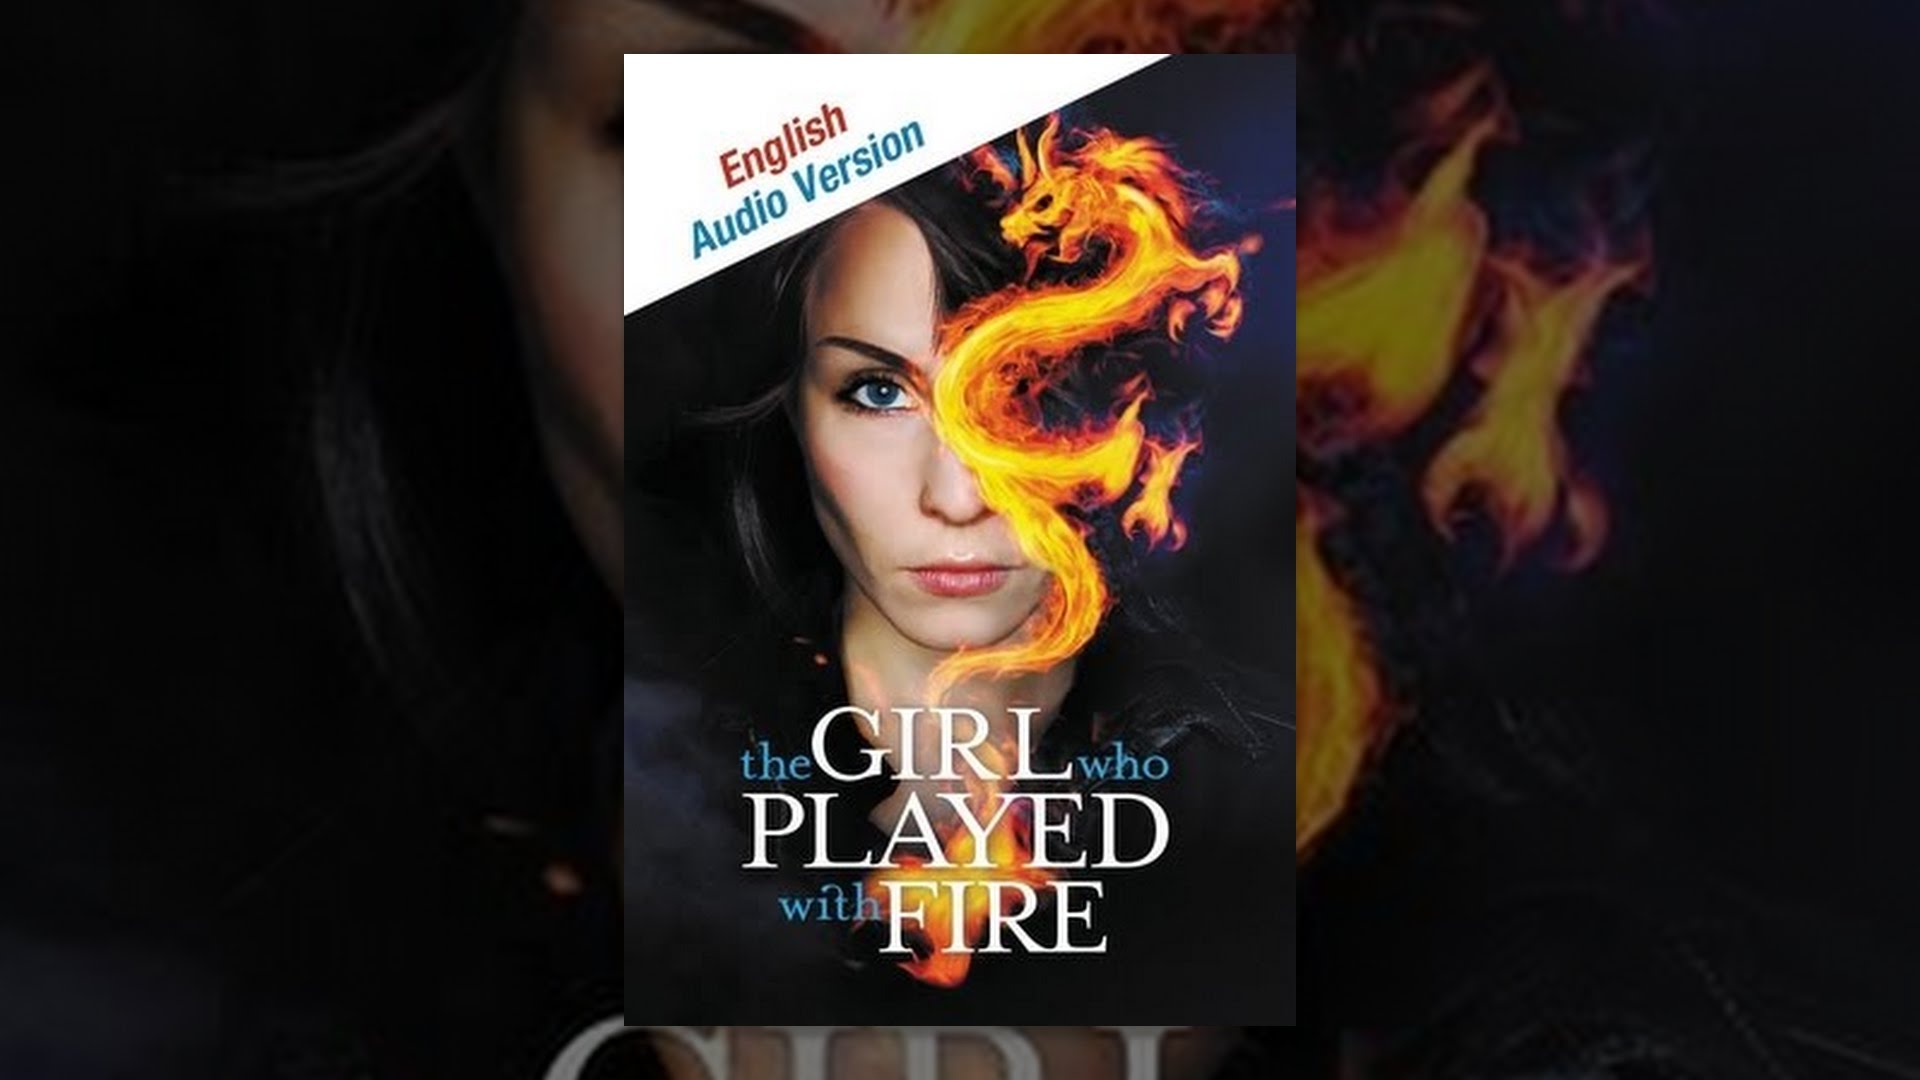 The Girl who Played with Fire (English Language Audio Version) - YouTube